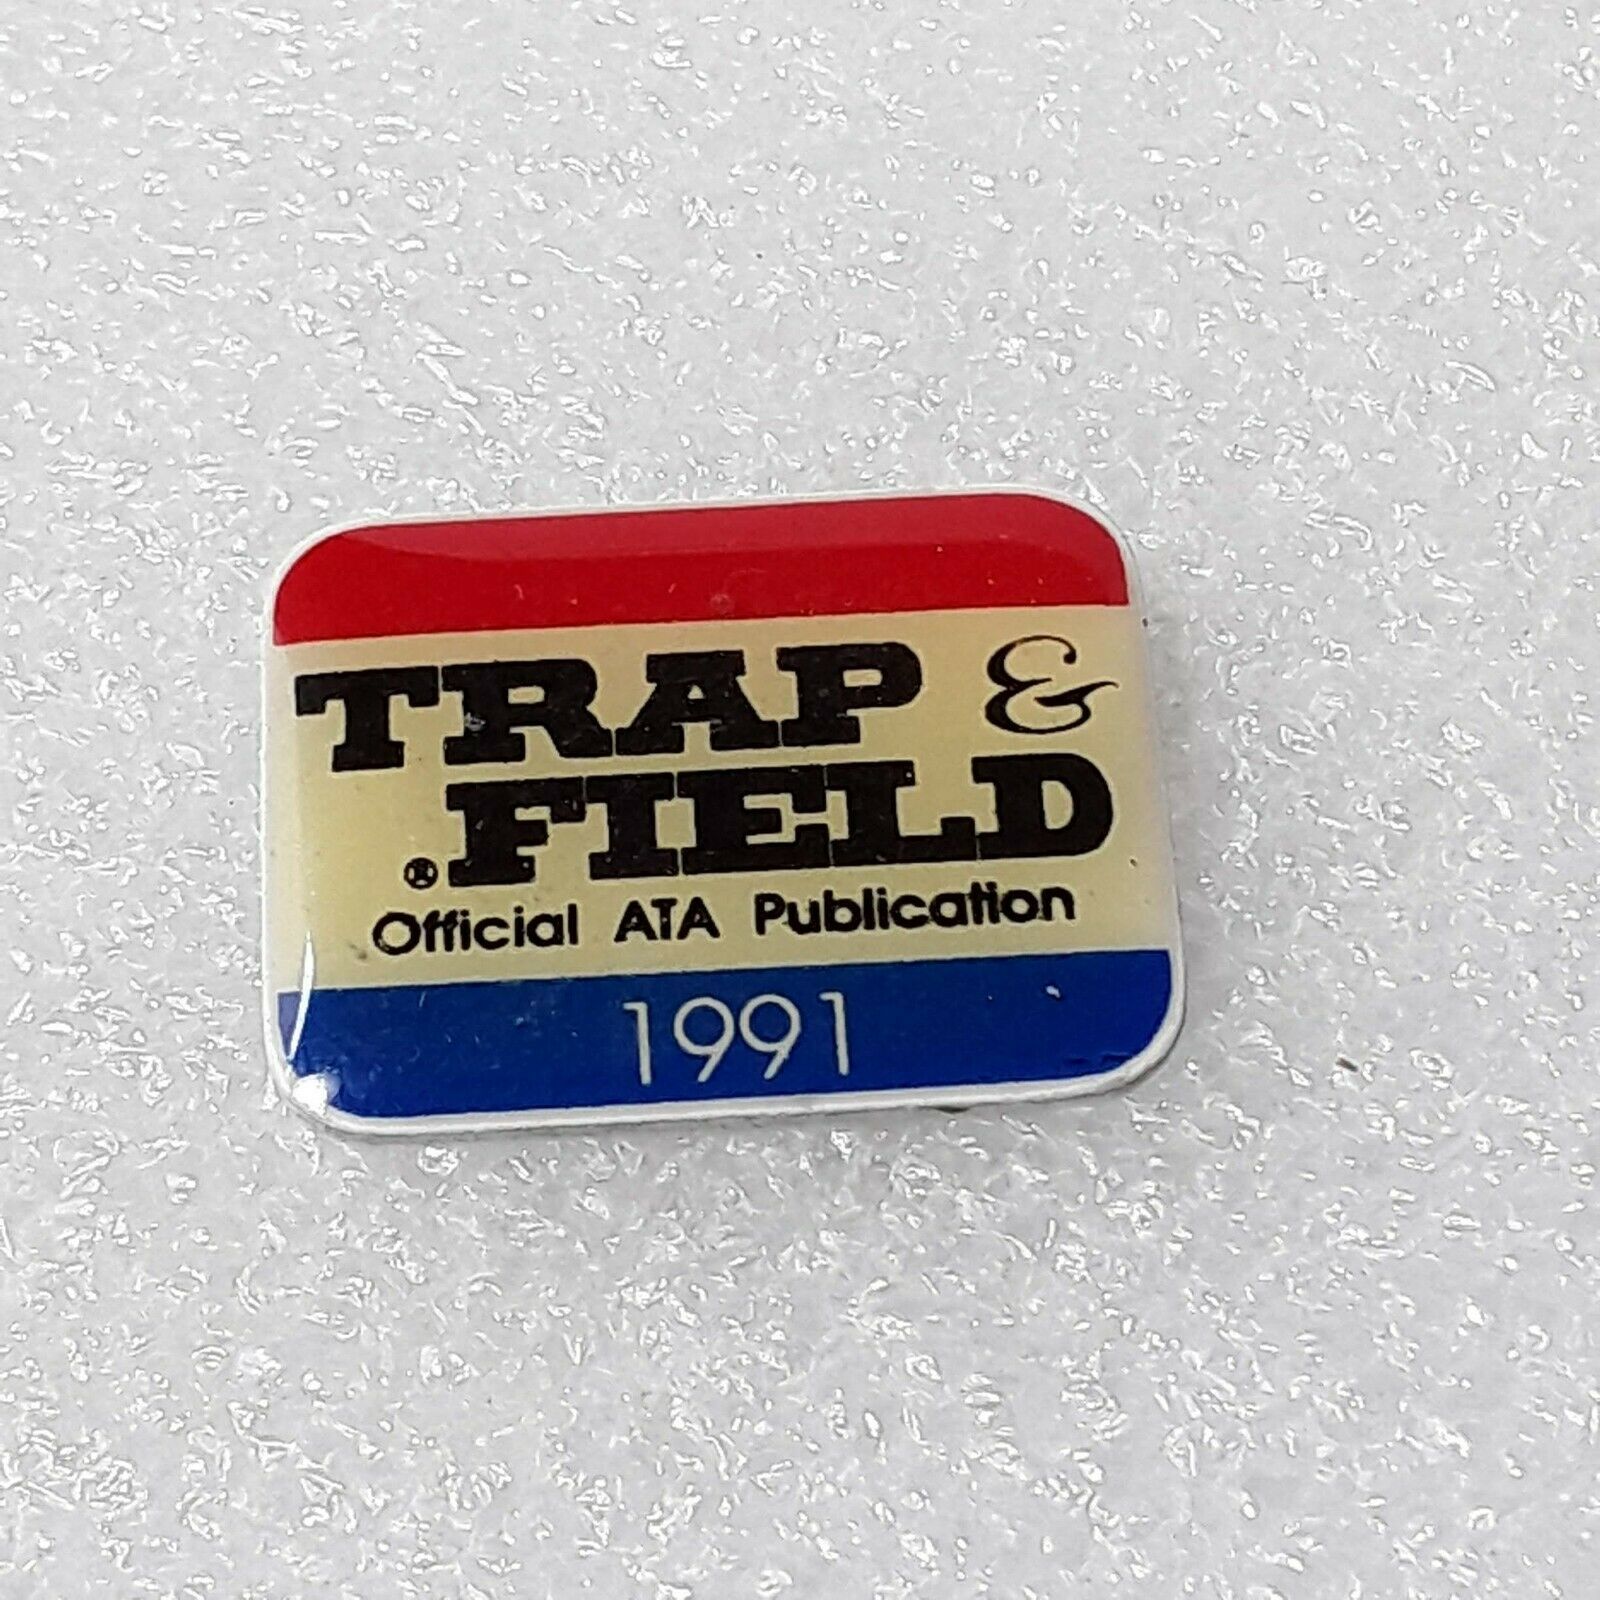 Primary image for Field & Trap Magazine Lapel Hat Pin - 1991 Official ATA Publication